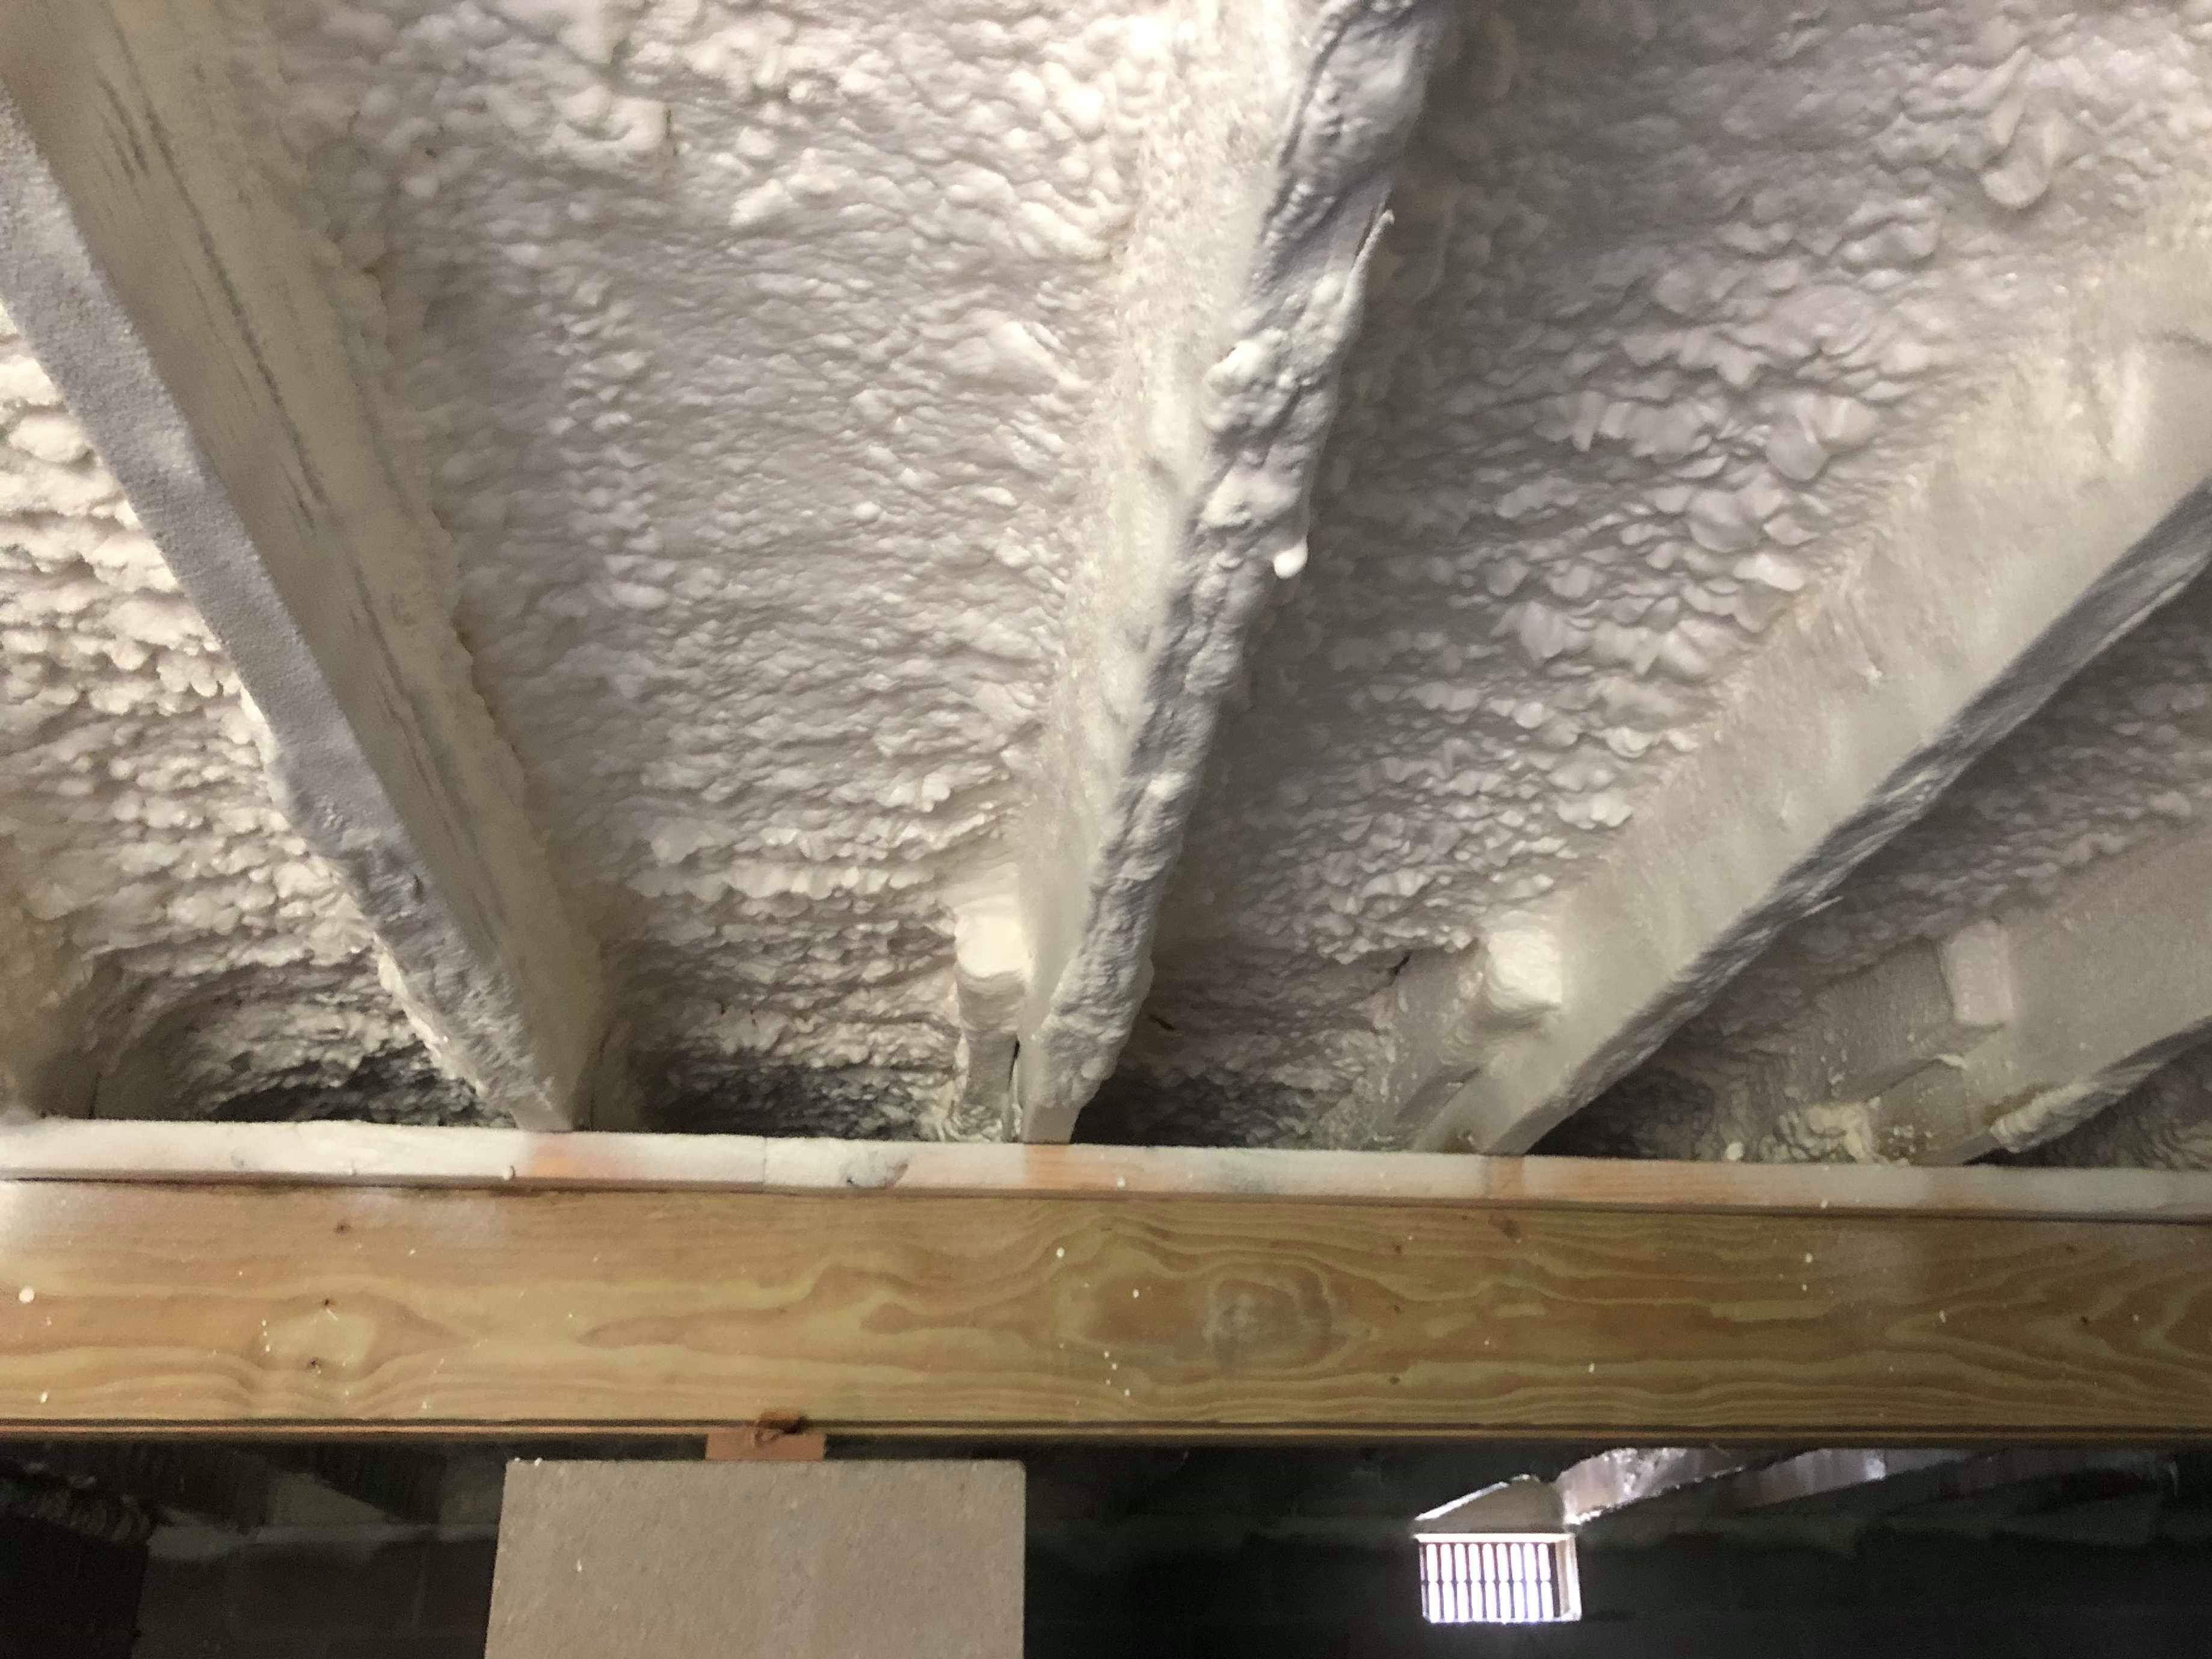 Sub-floor with closed cell foam insulation